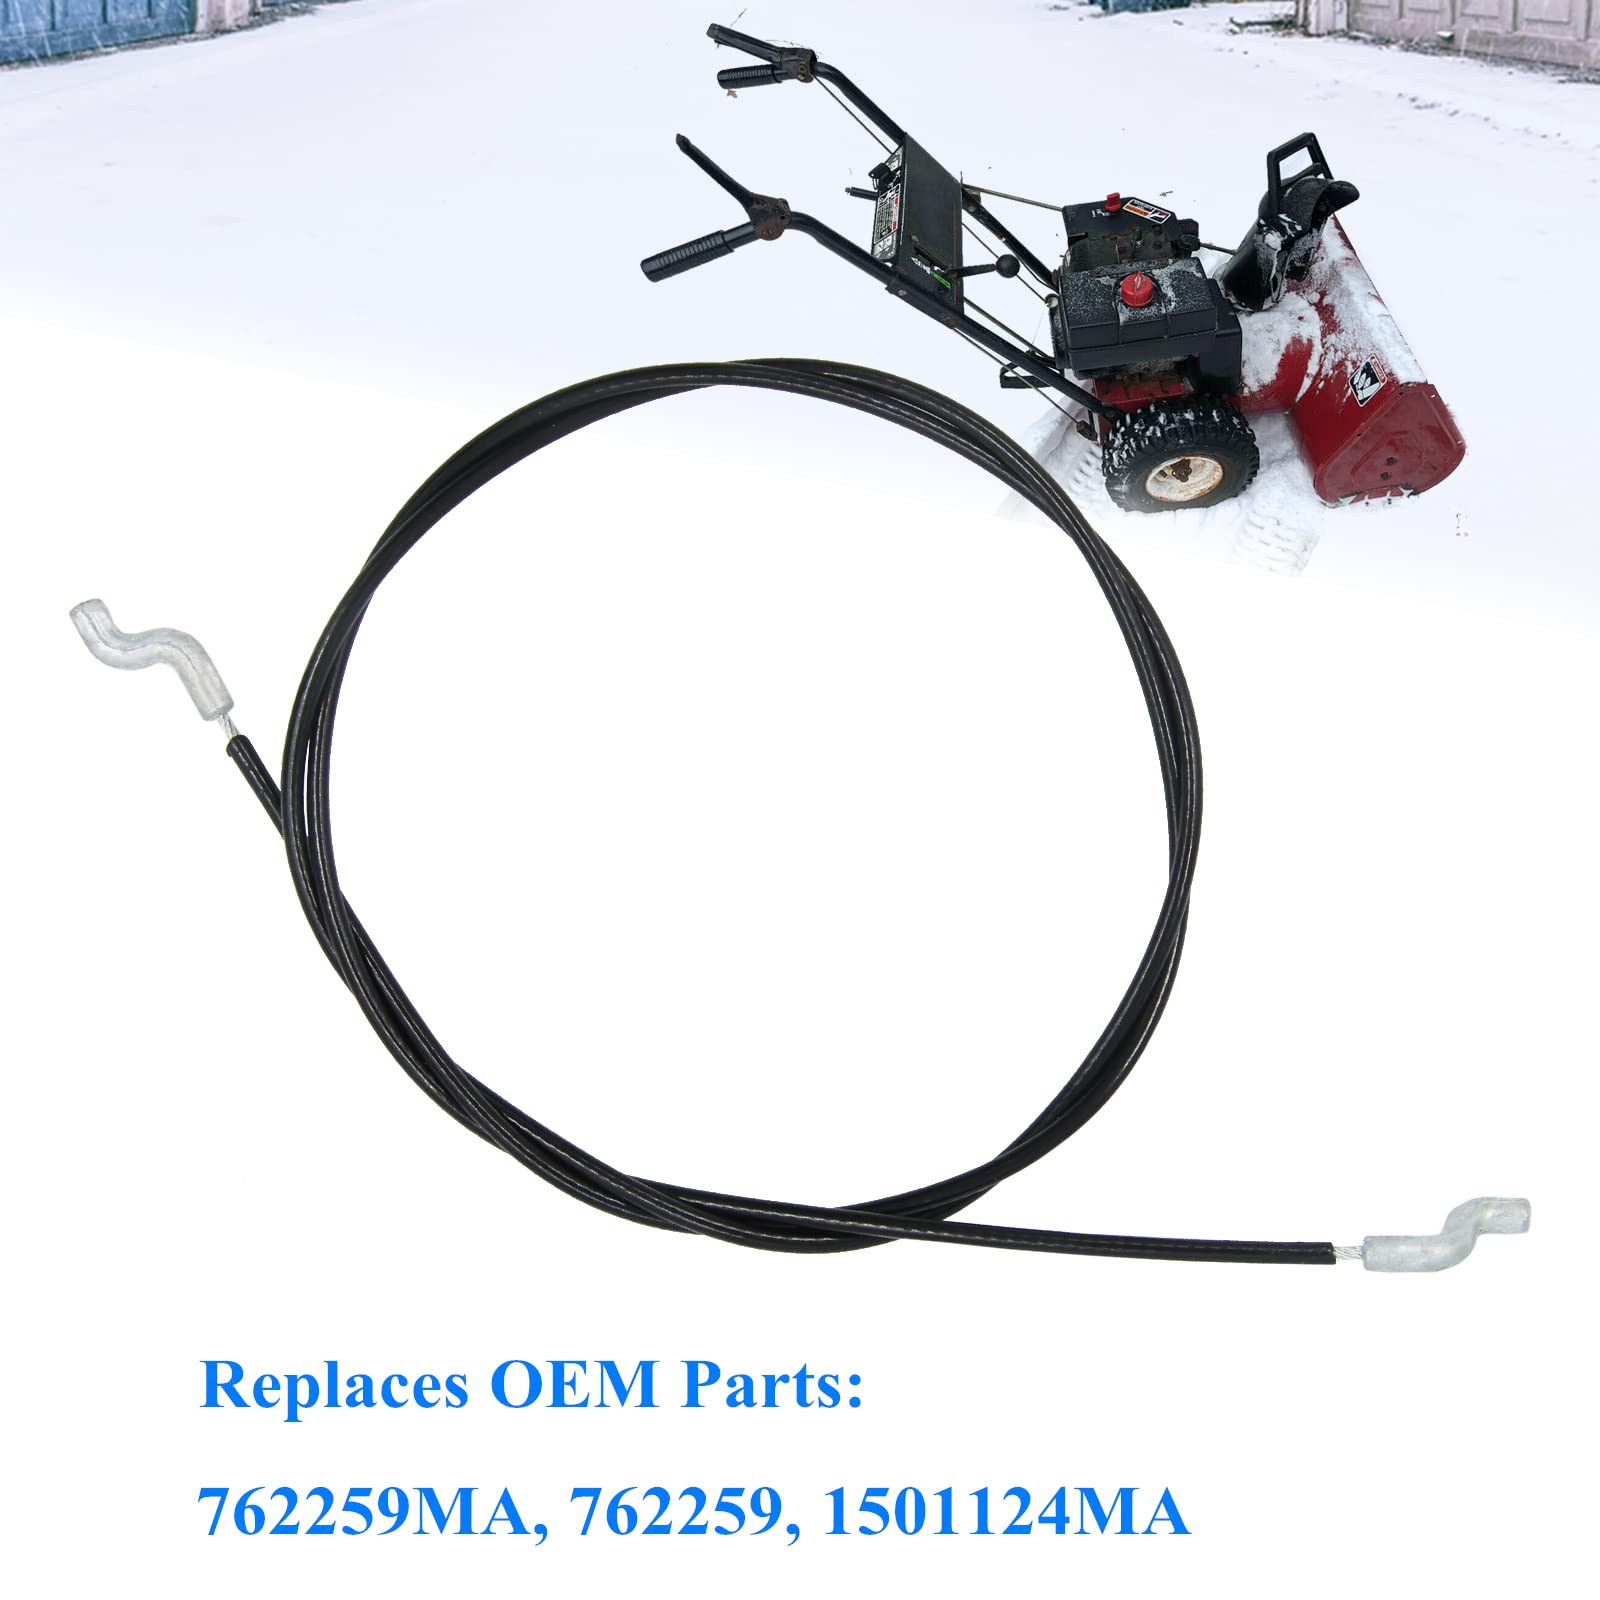 AILEETE 762259MA Auger Drive Cable for Craftsman Murray Single Stage & Dual Stage Snow Thrower Snowblower Drive Cable 762259 1501124MA